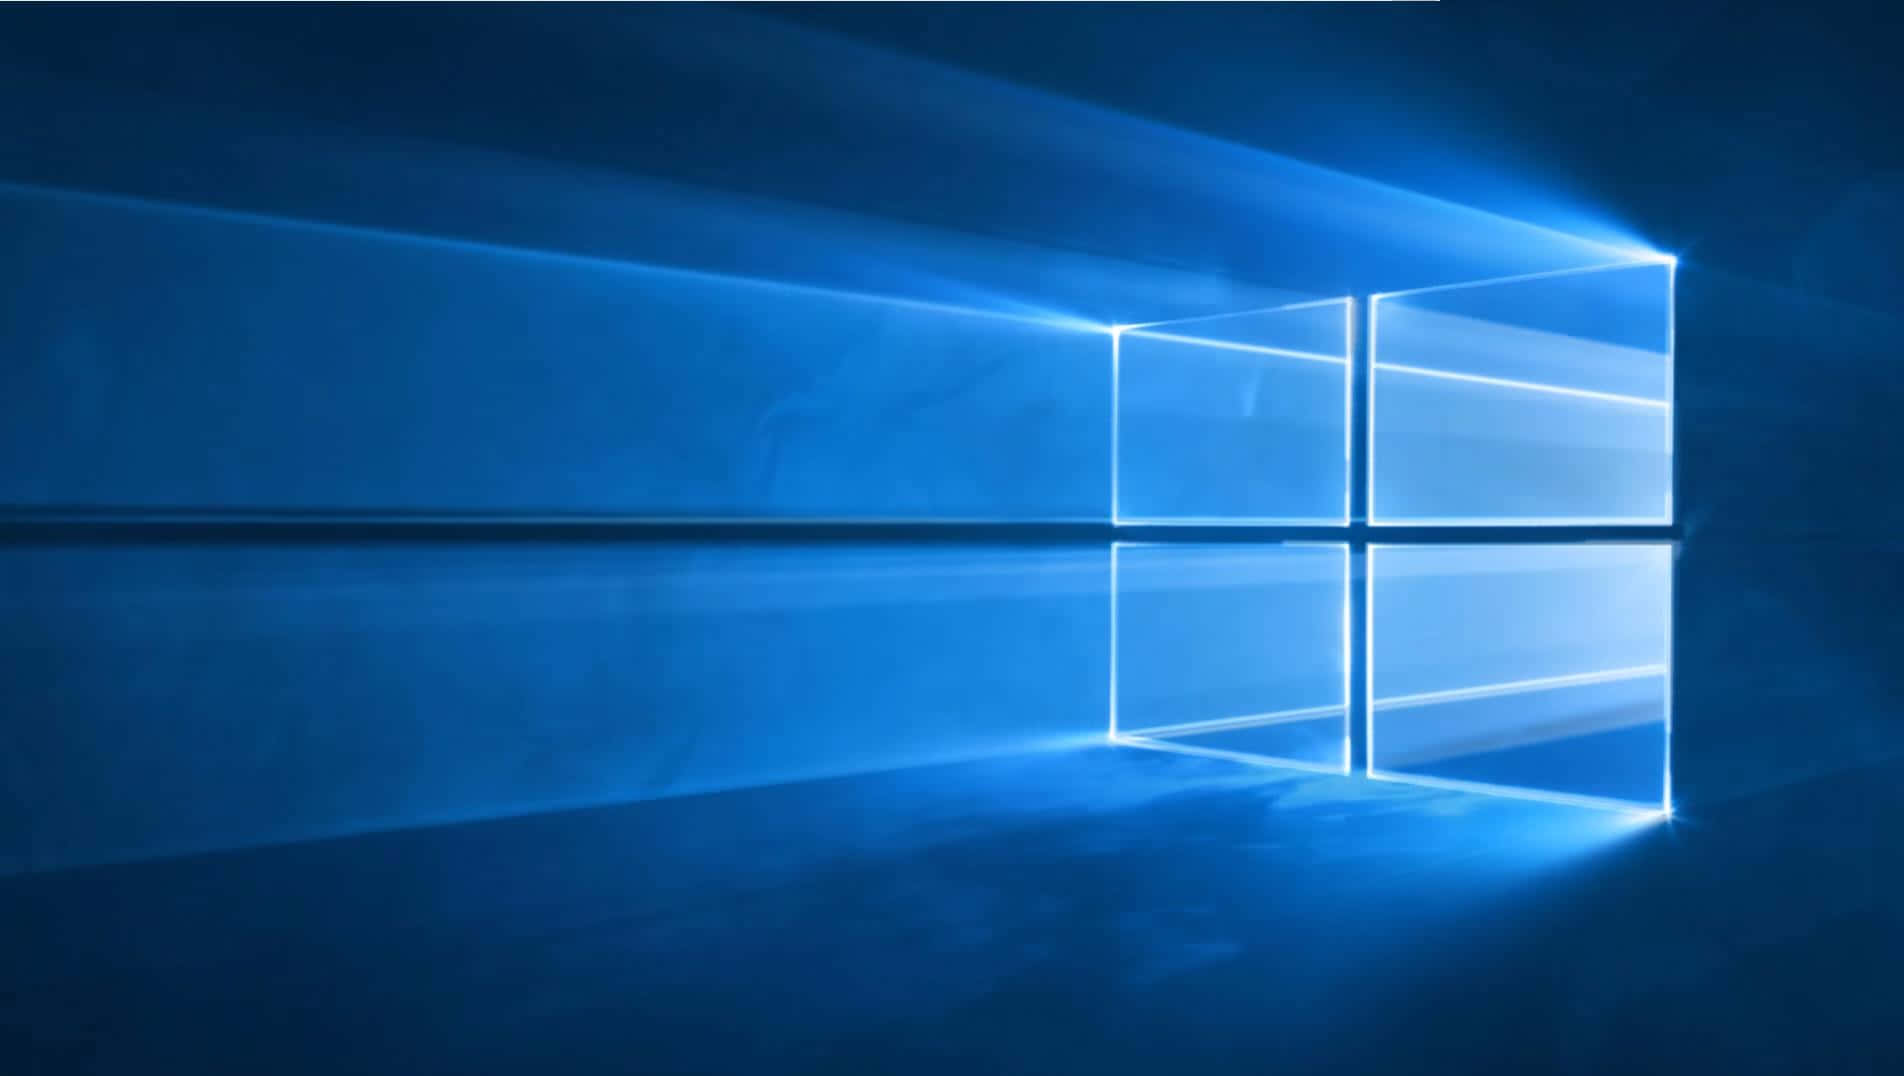 Windows 10 Logo With A Blue Background Wallpaper